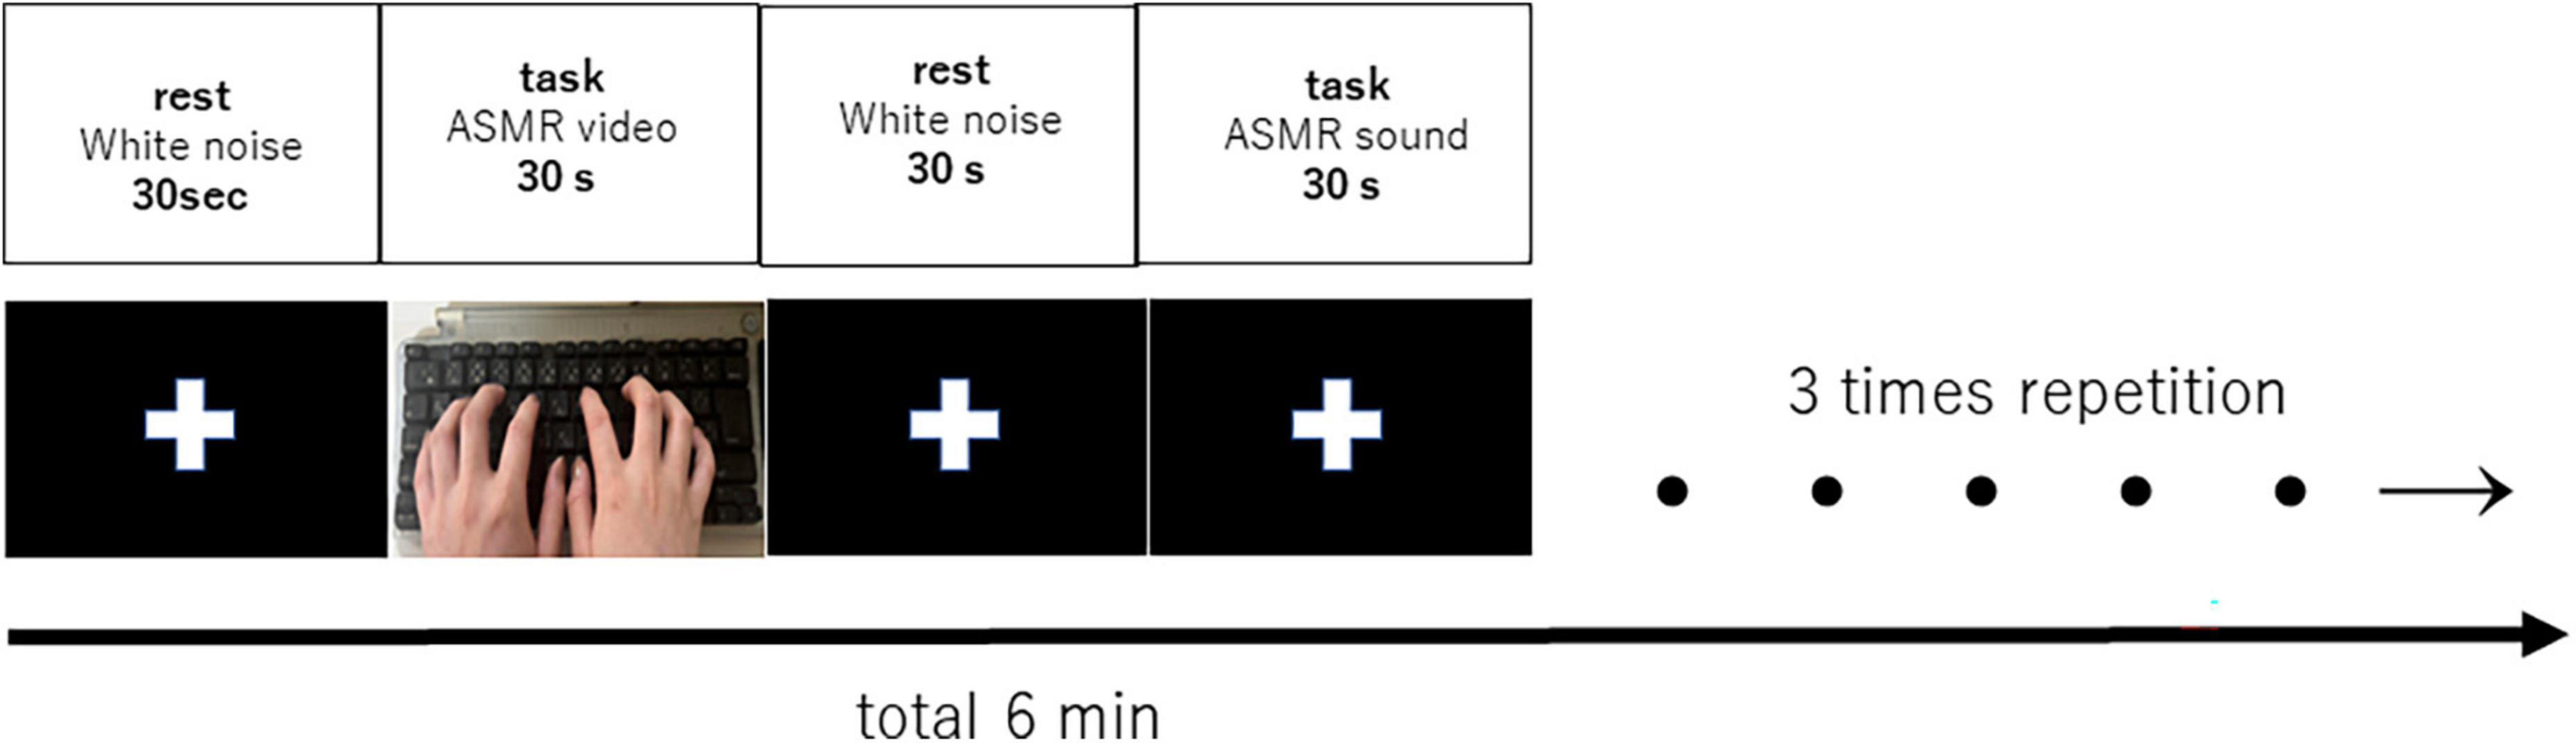 Anxiety and Neuroticism Linked to Ability to Experience ASMR - Neuroscience  News